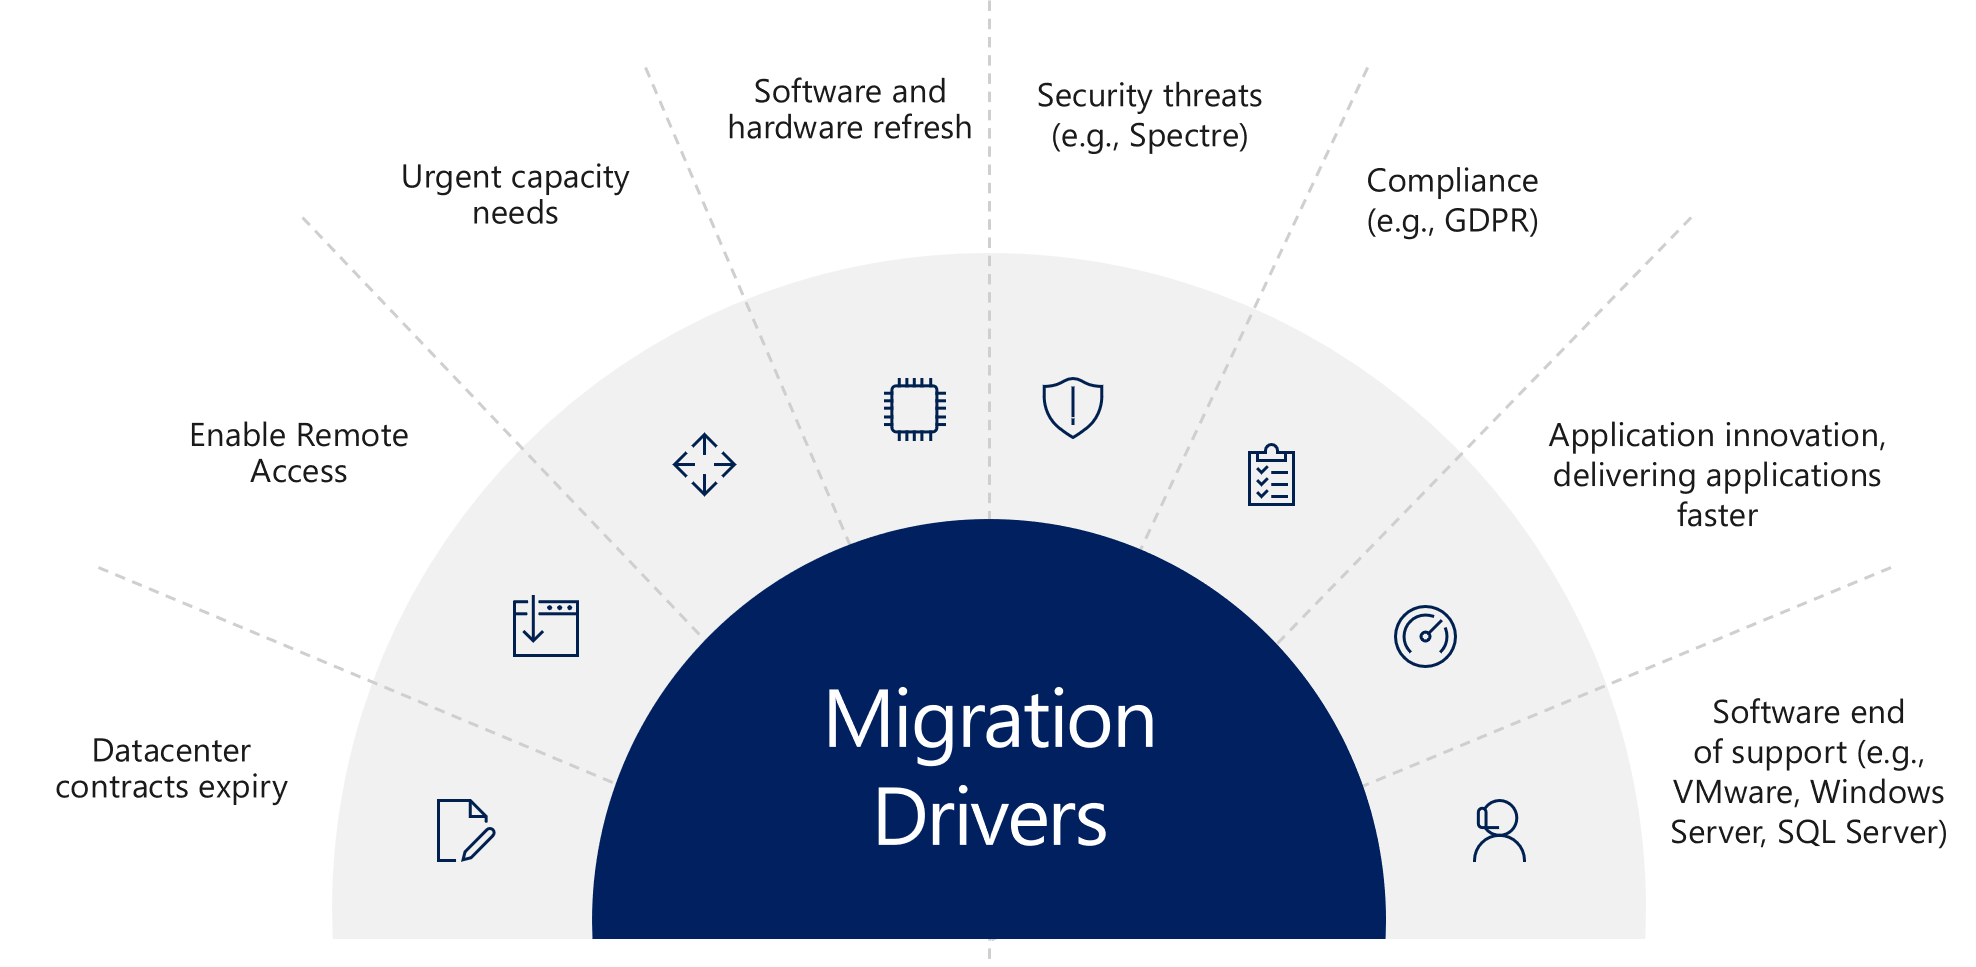 Factors that drive Azure migration, including capacity needs, software and hardware refresh, security and compliance, and application innovation